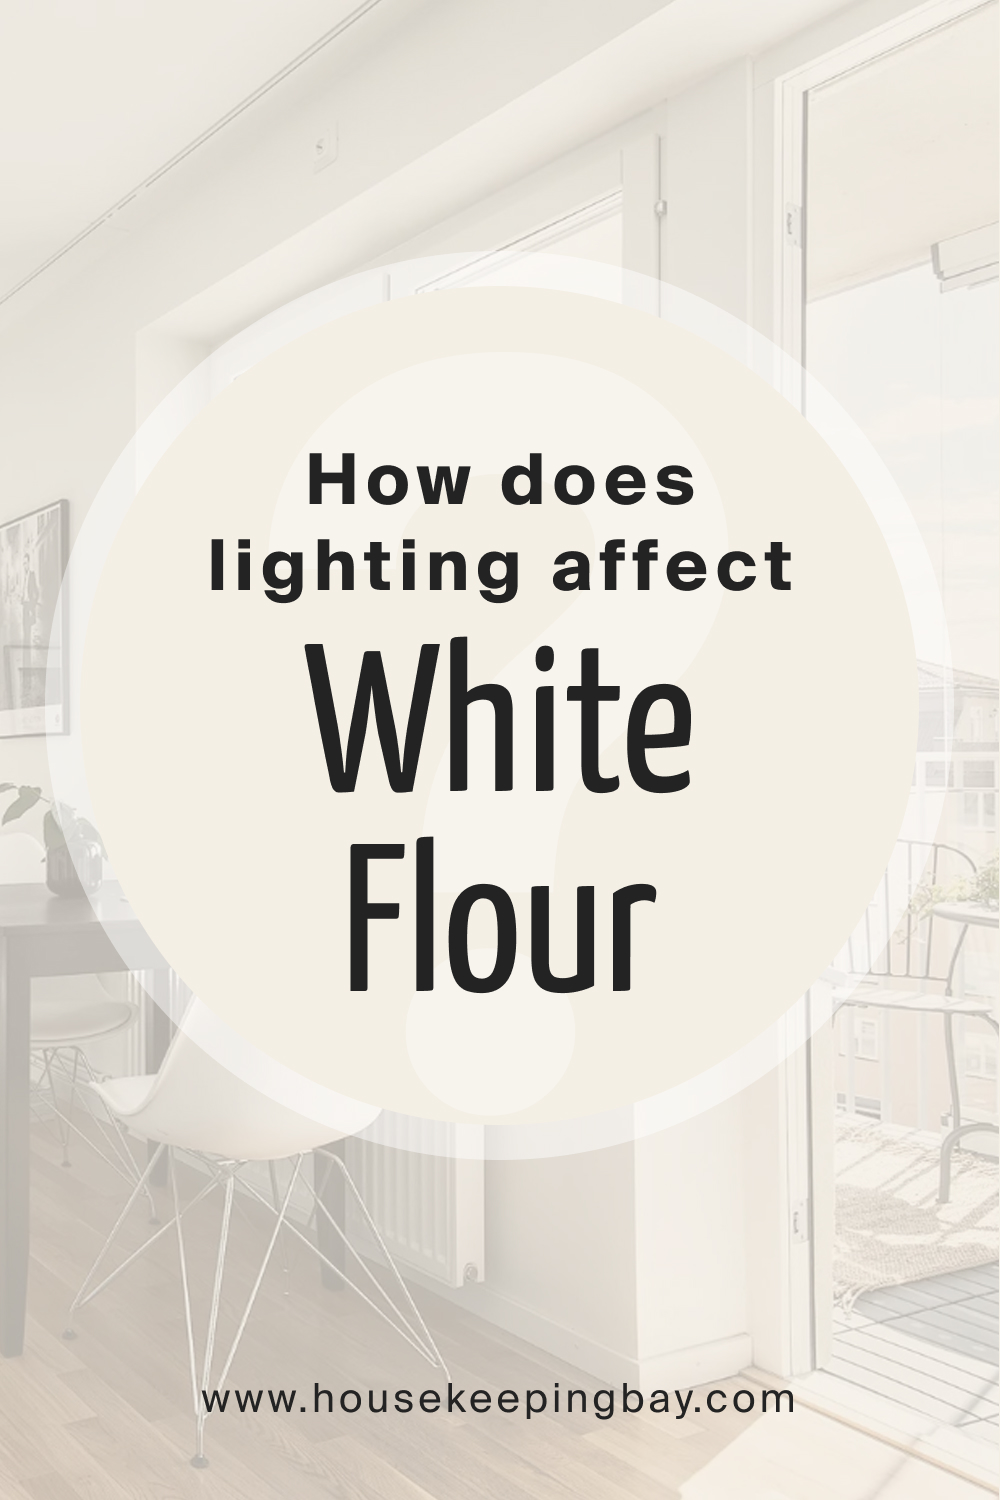 How does lighting affect SW White Flour